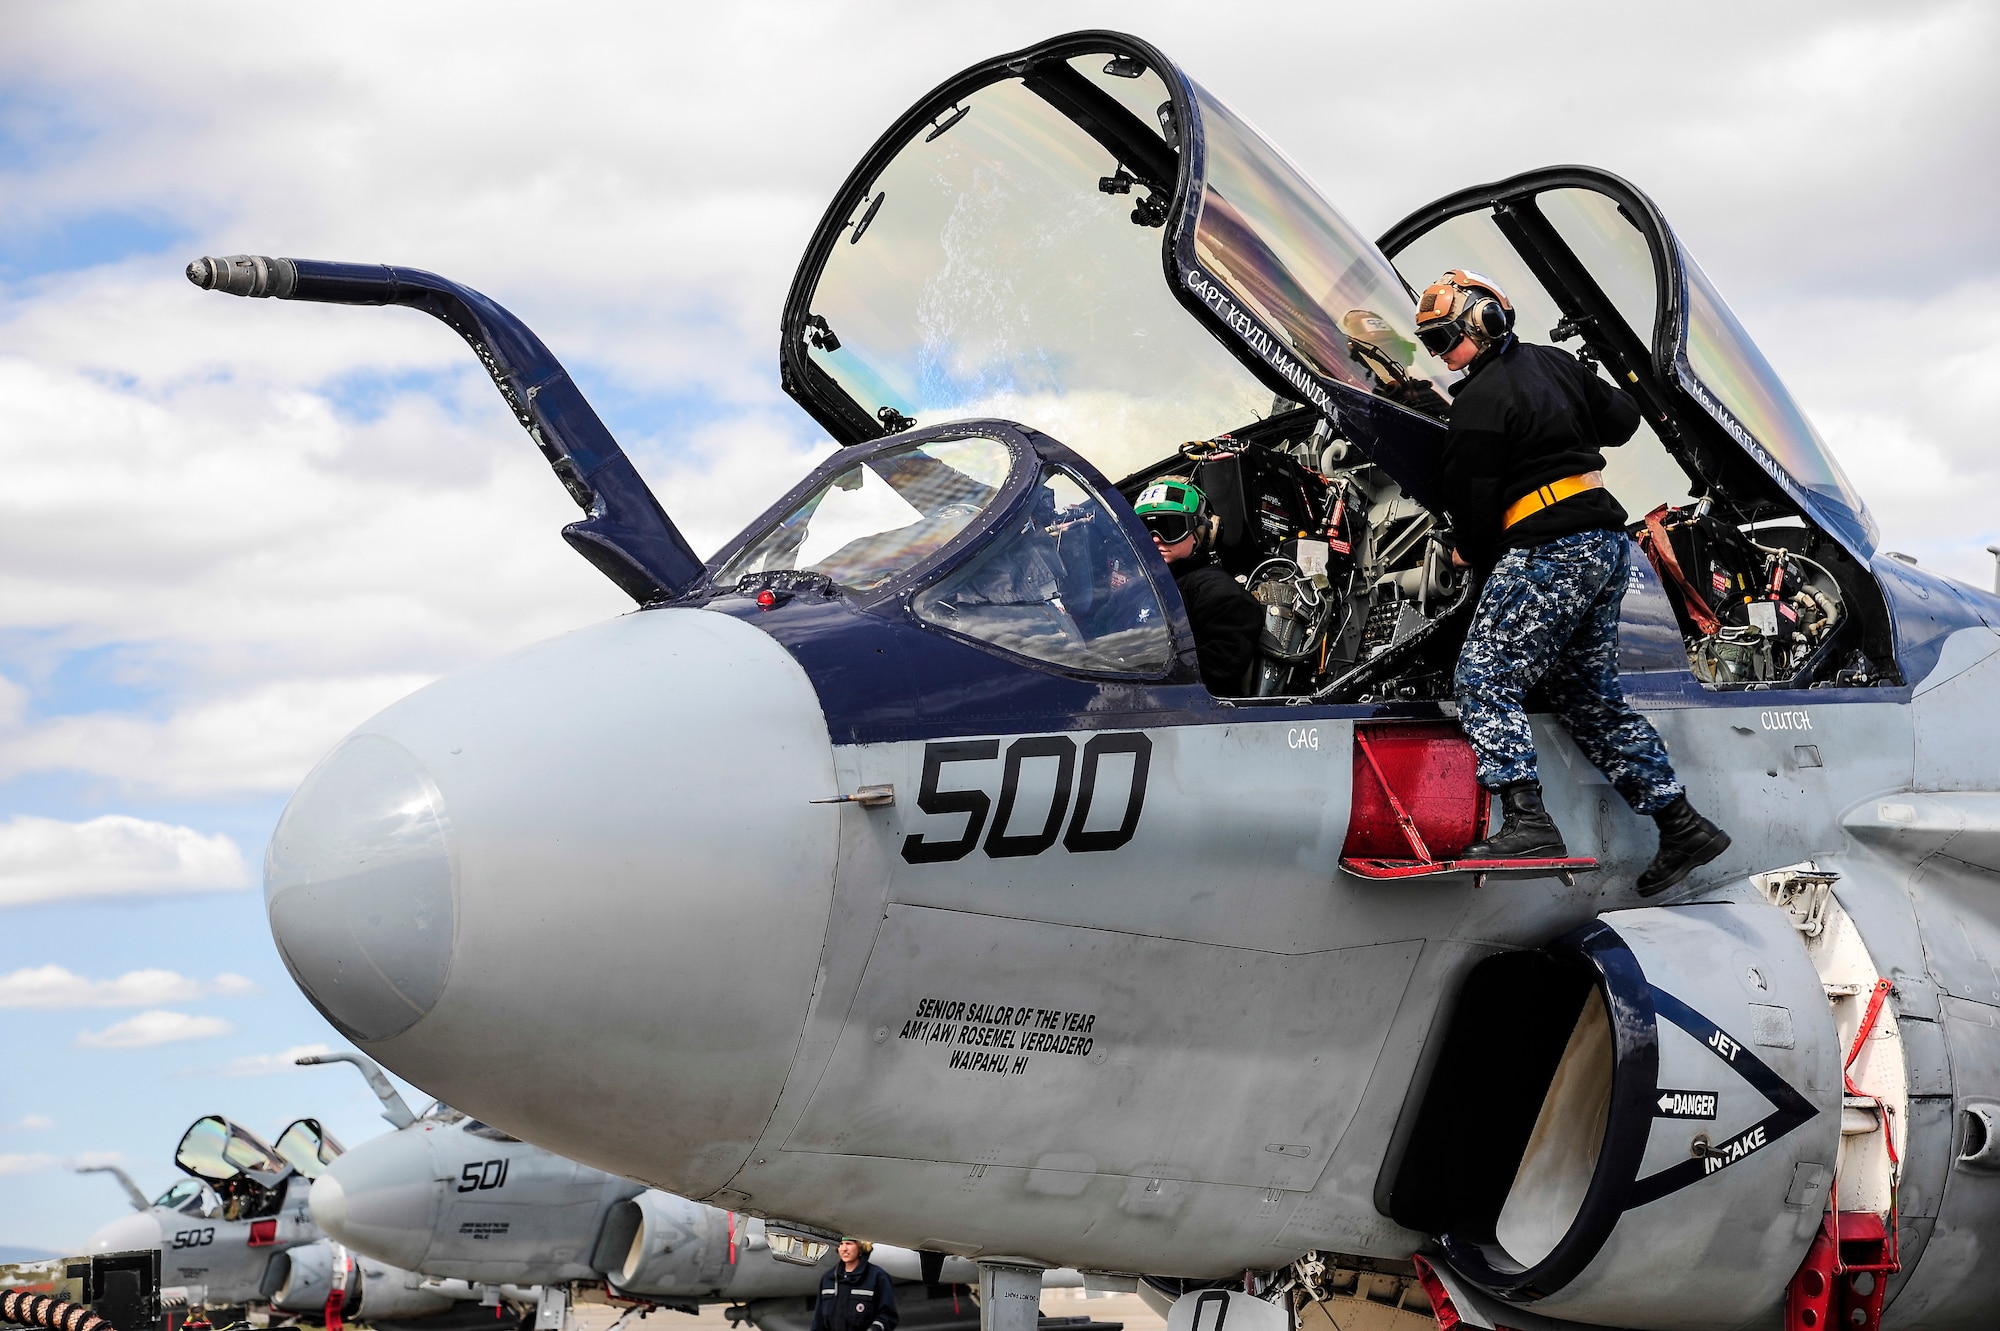 U.S. Navy EA-6B Prowler crew chiefs from the Electronic Attack Squadron 142, Naval Air Station Whidbey Island, Oak Harbor, Wash., perform preflight procedures May 22, 2014, Eielson Air Force Base, Alaska. Sailors are here at Eielson to attend RED FLAG-Alaska 14-1, a Pacific Air Forces-directed field-training exercise for U.S. and coalition forces. (U.S. Air Force photo by Senior Airman Zachary Perras/Released)